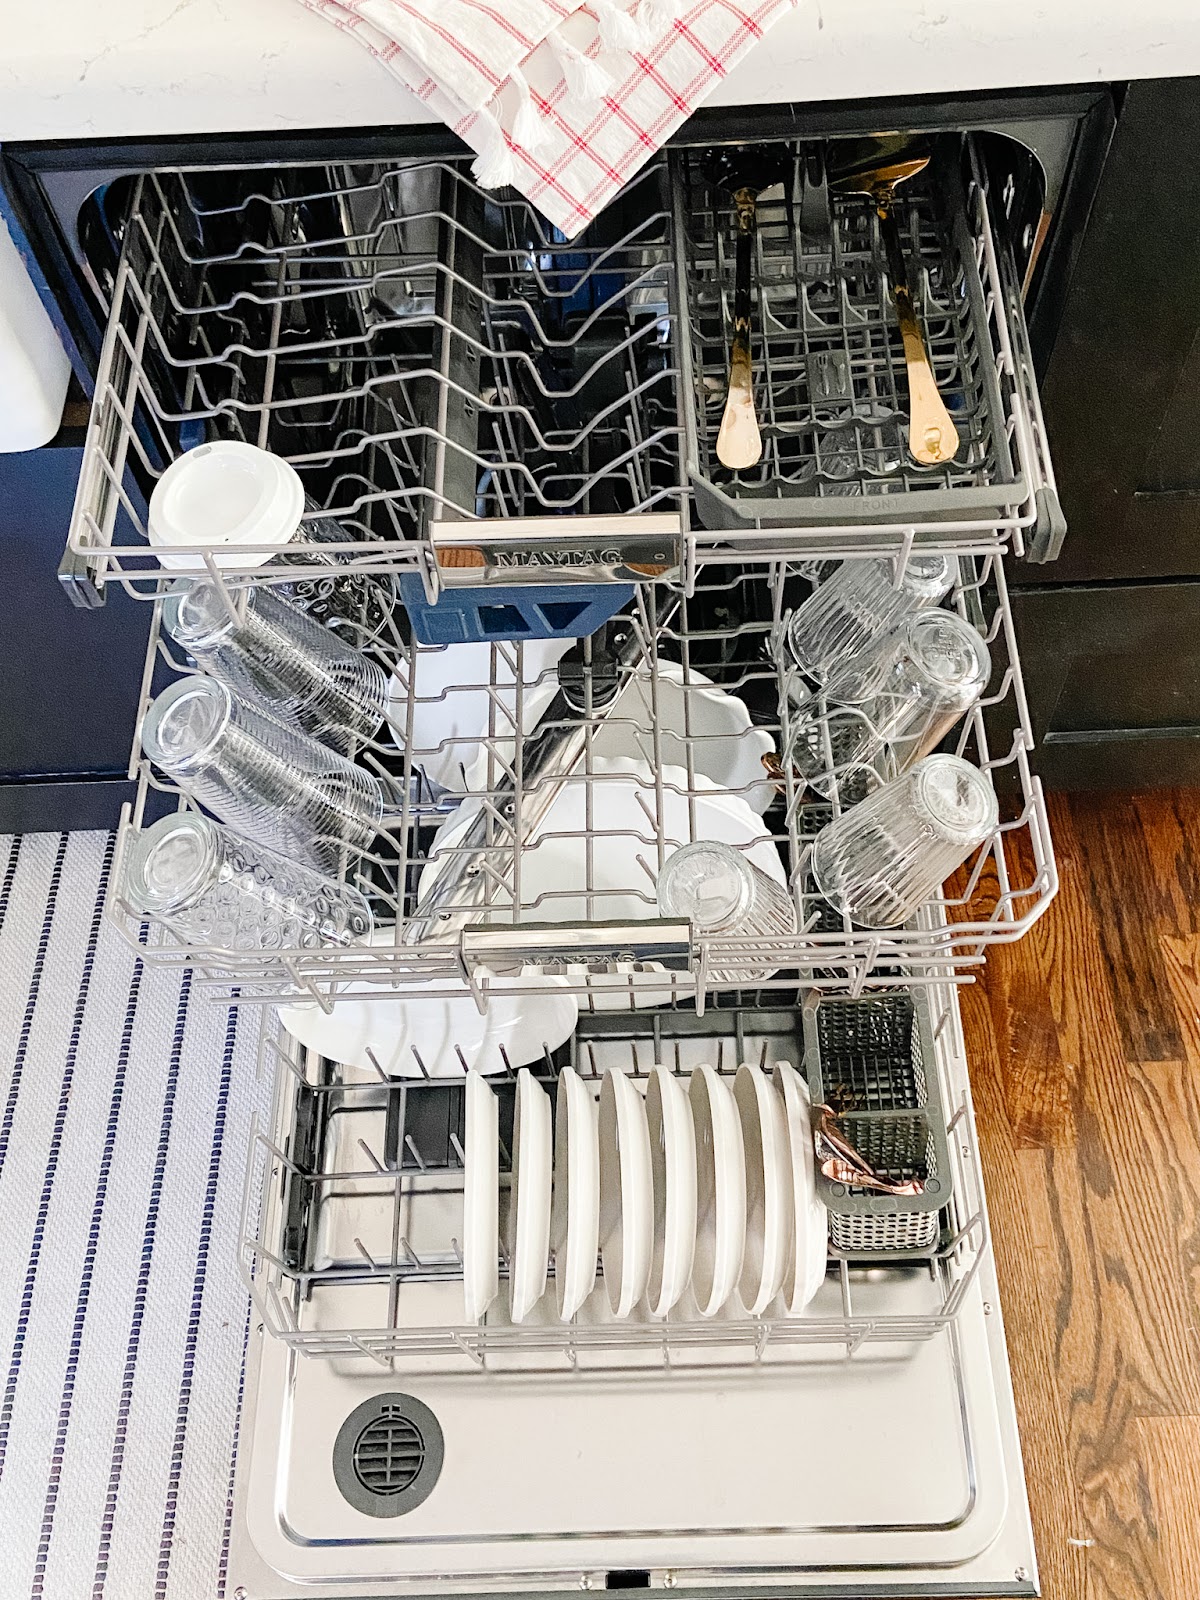 #ad SIX reasons we chose our @Maytag dishwasher and free family dishwasher printable to keep your kitchen running smoothly! #Maytag